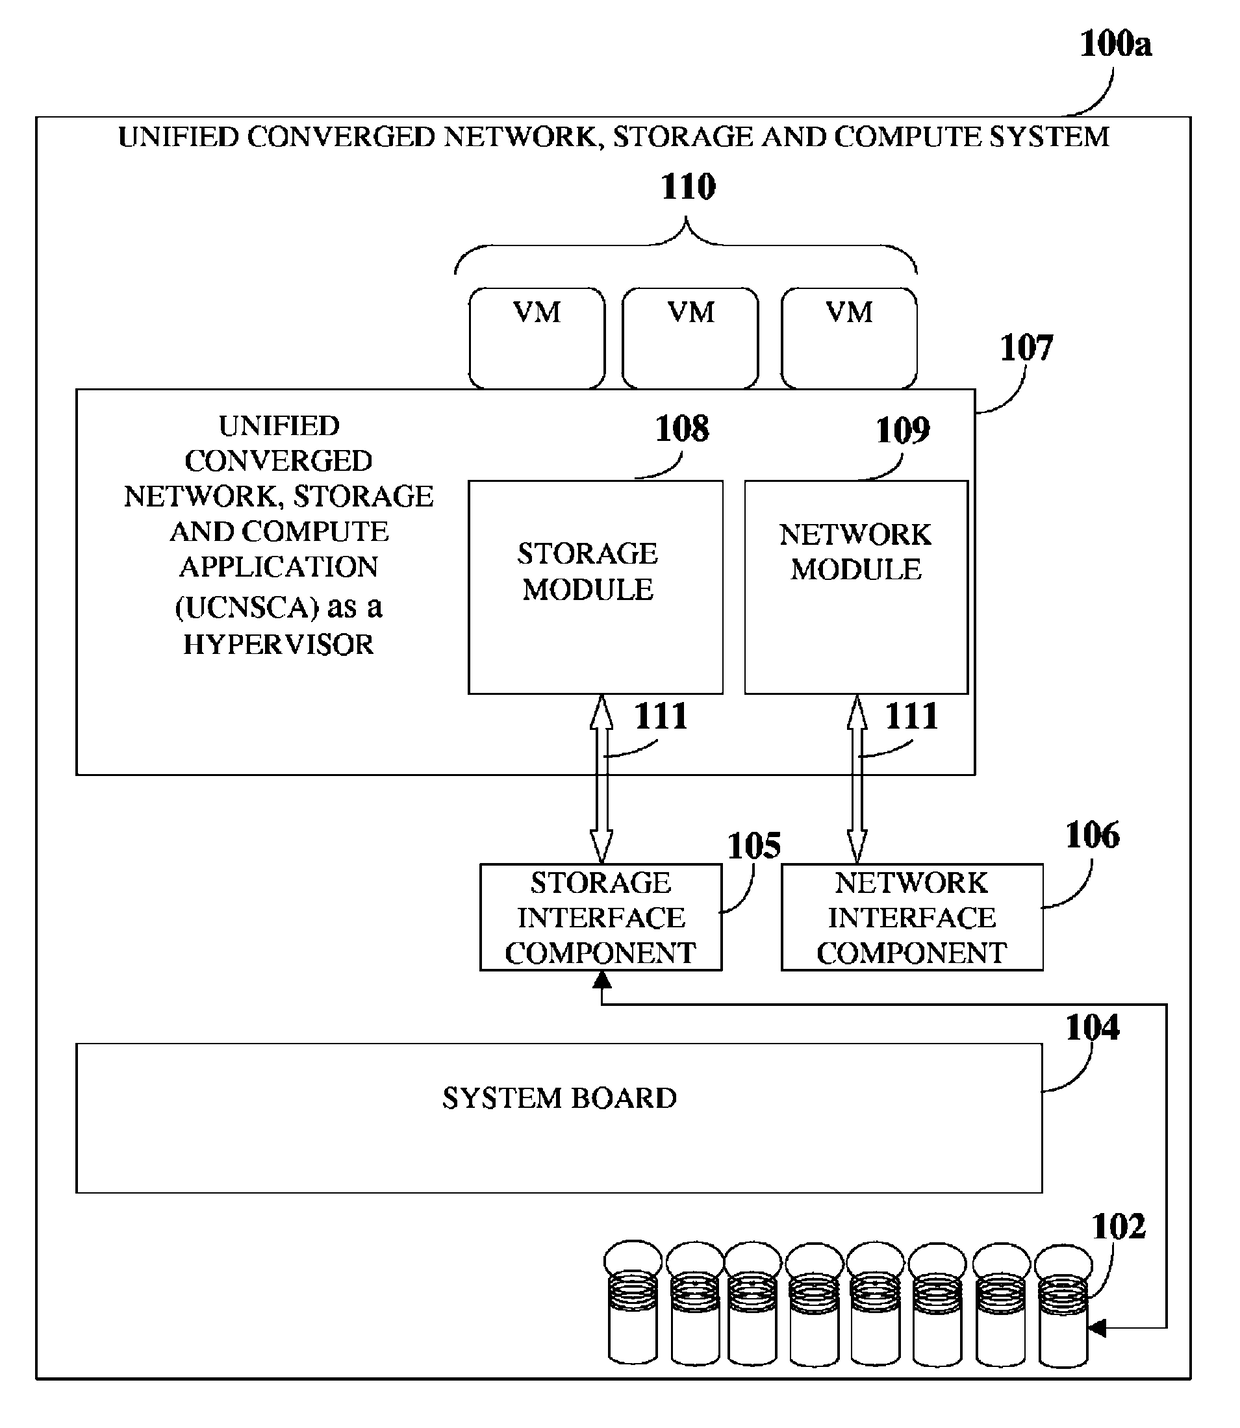 Unified converged network, storage and compute system